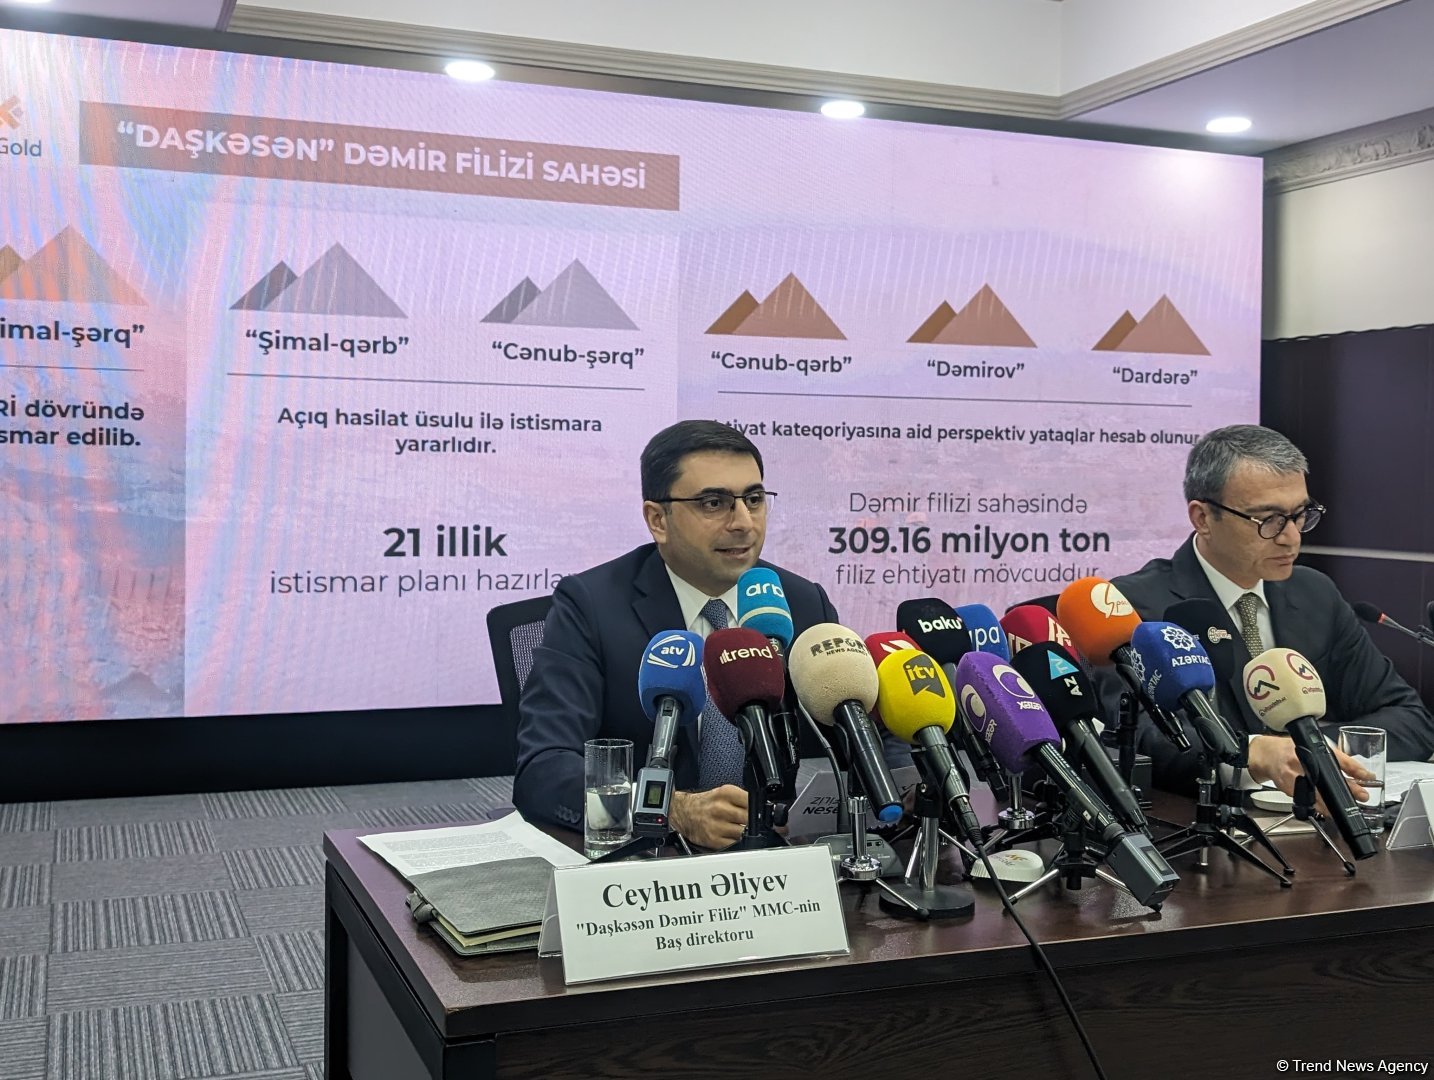 Expected contribution of new iron ore fields to Azerbaijan's GDP released